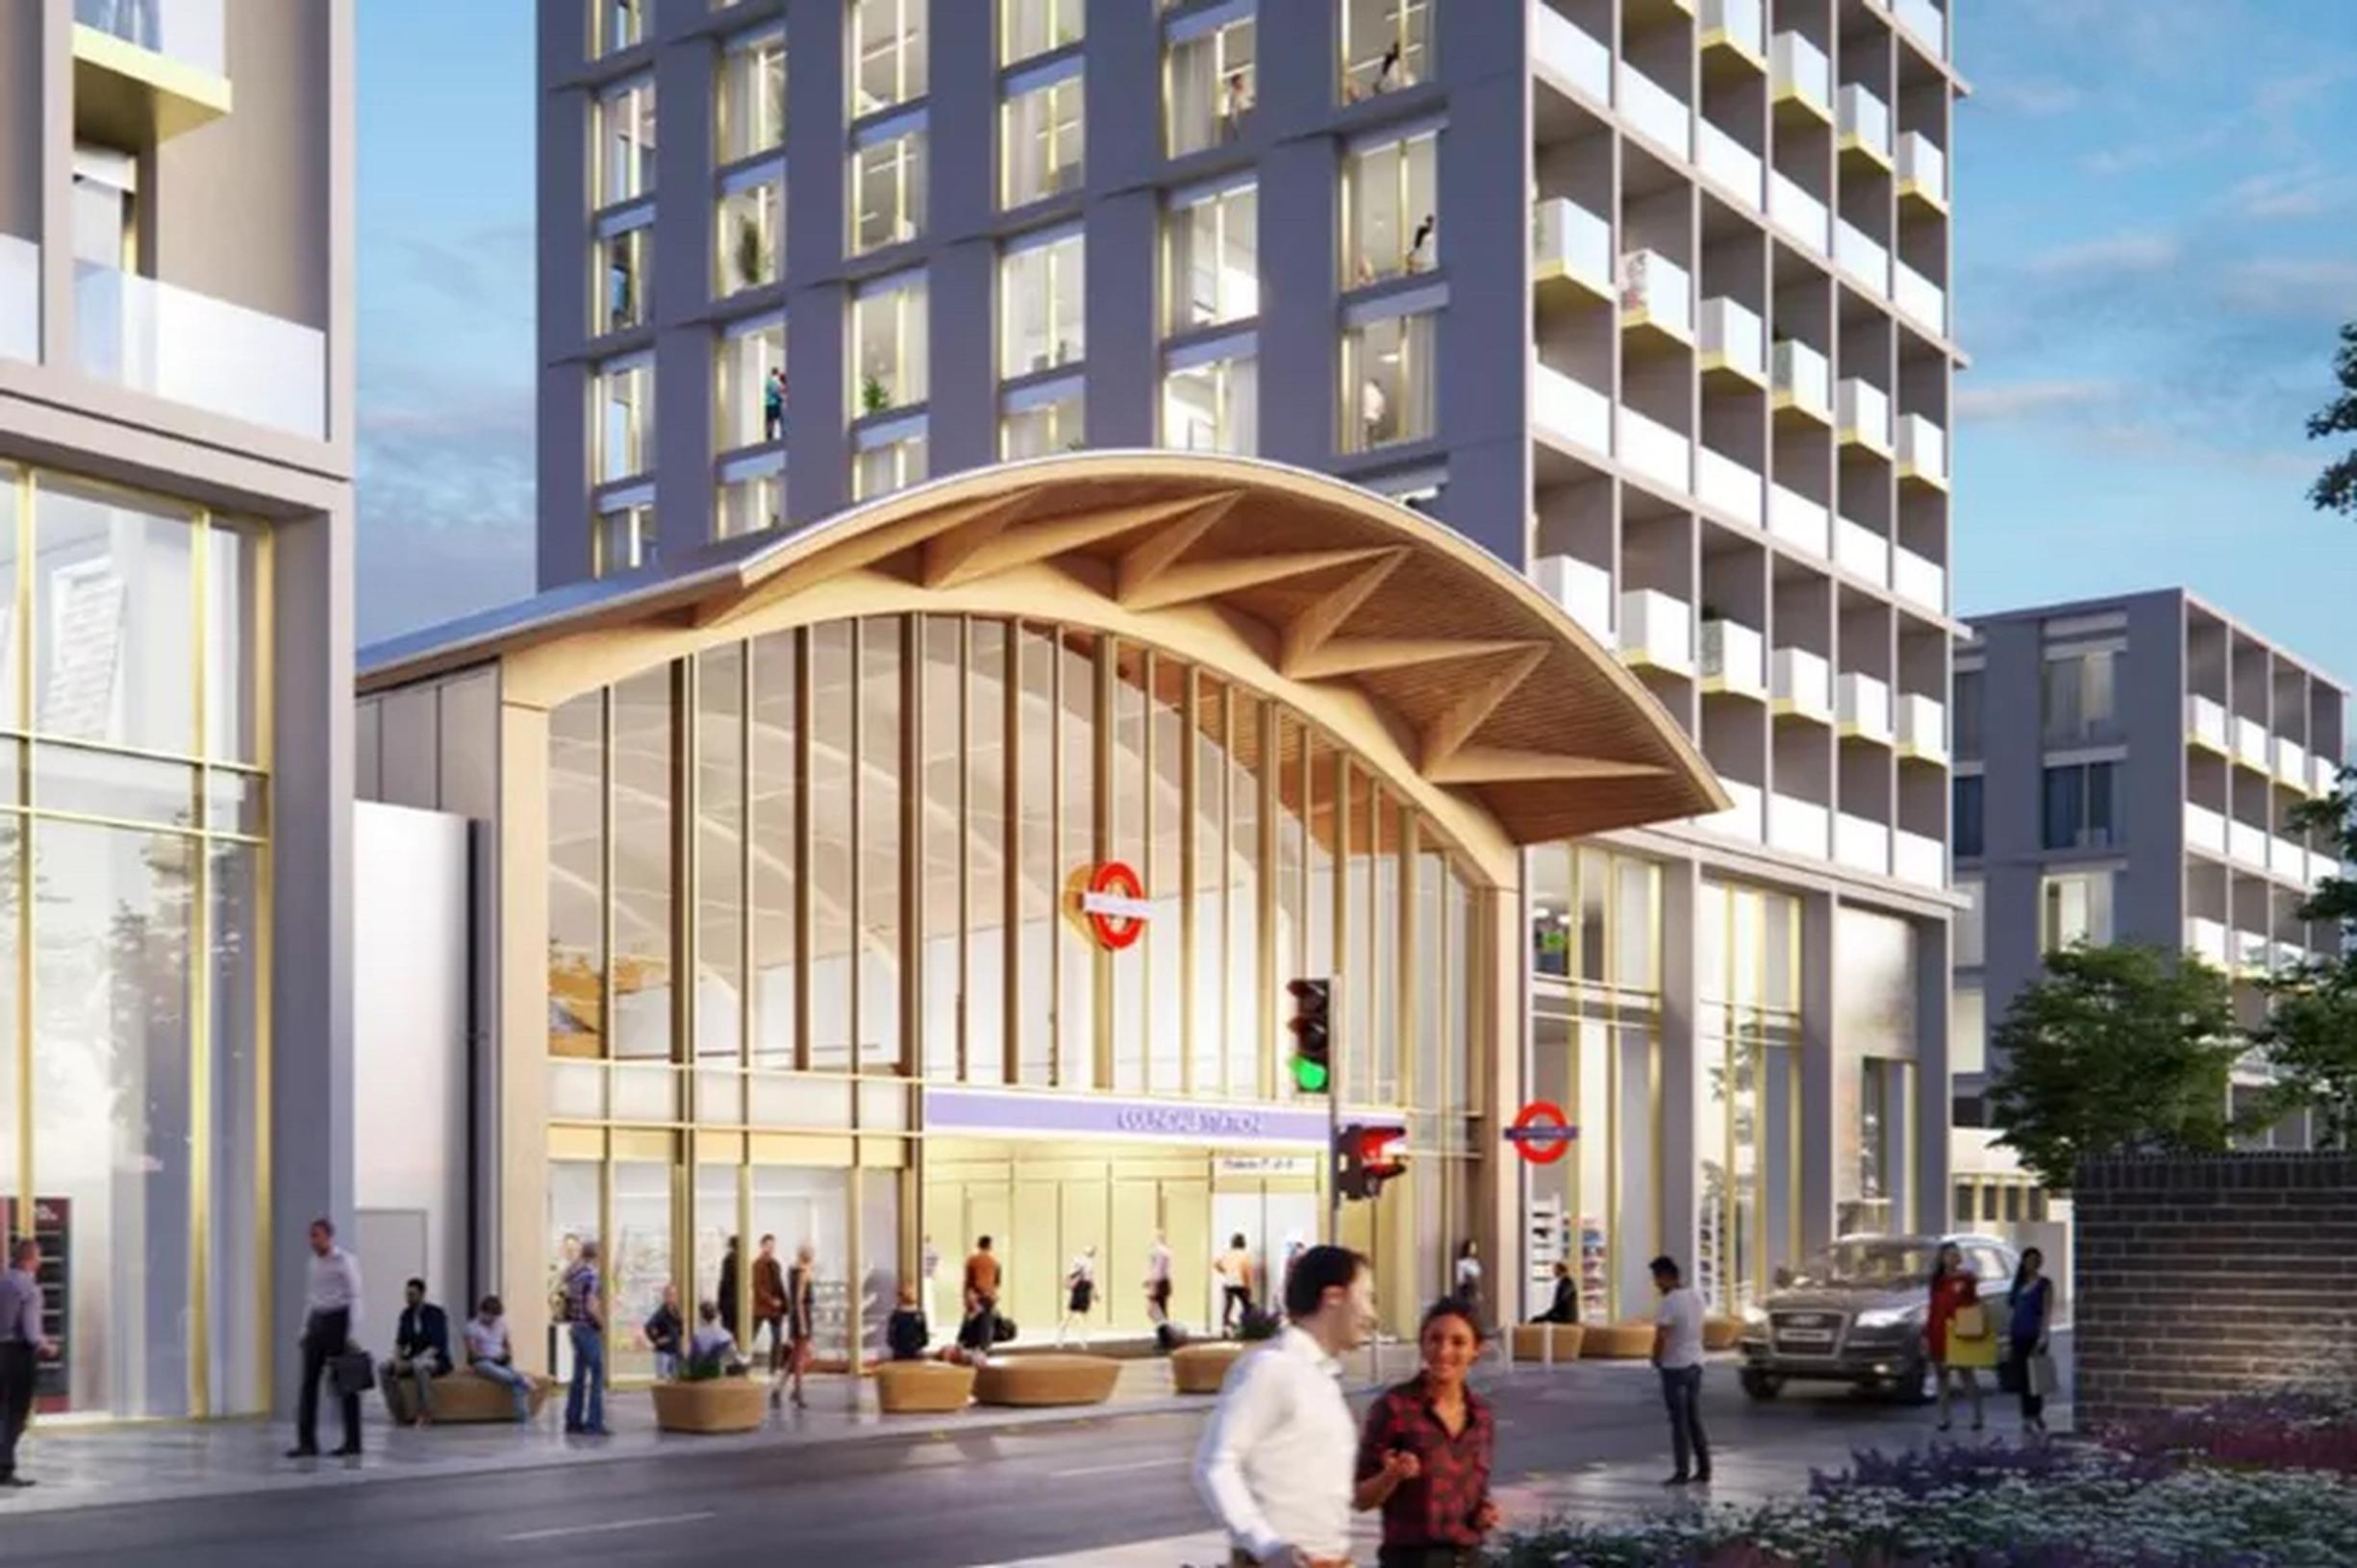 Colindale station’s 1960s-built entrance will be replaced with a ‘landmark’ station building